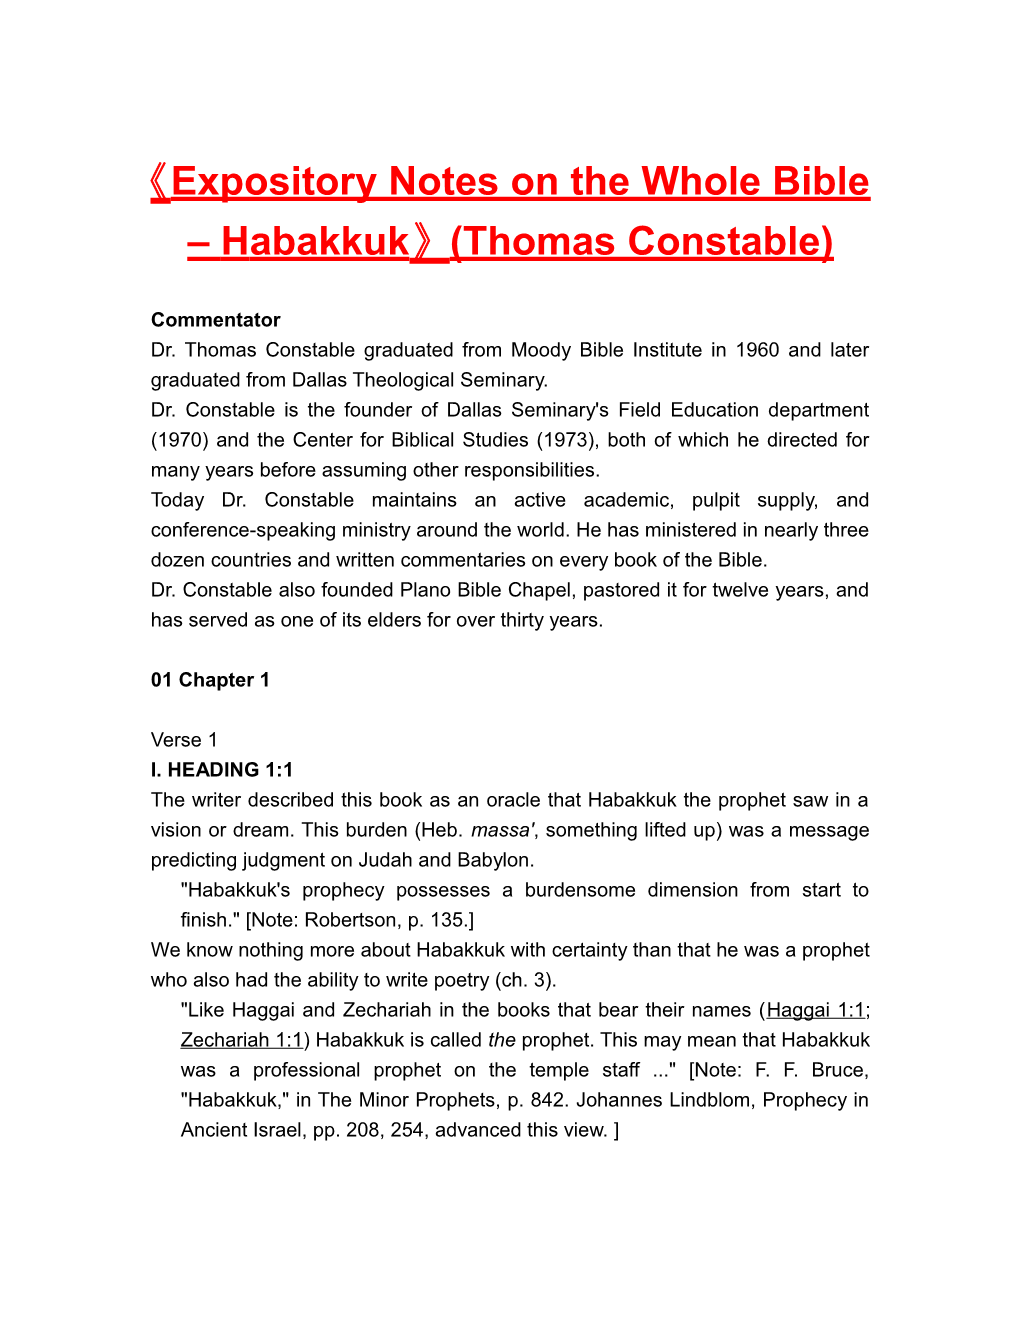 Expositorynotes on the Wholebible Habakkuk (Thomas Constable)